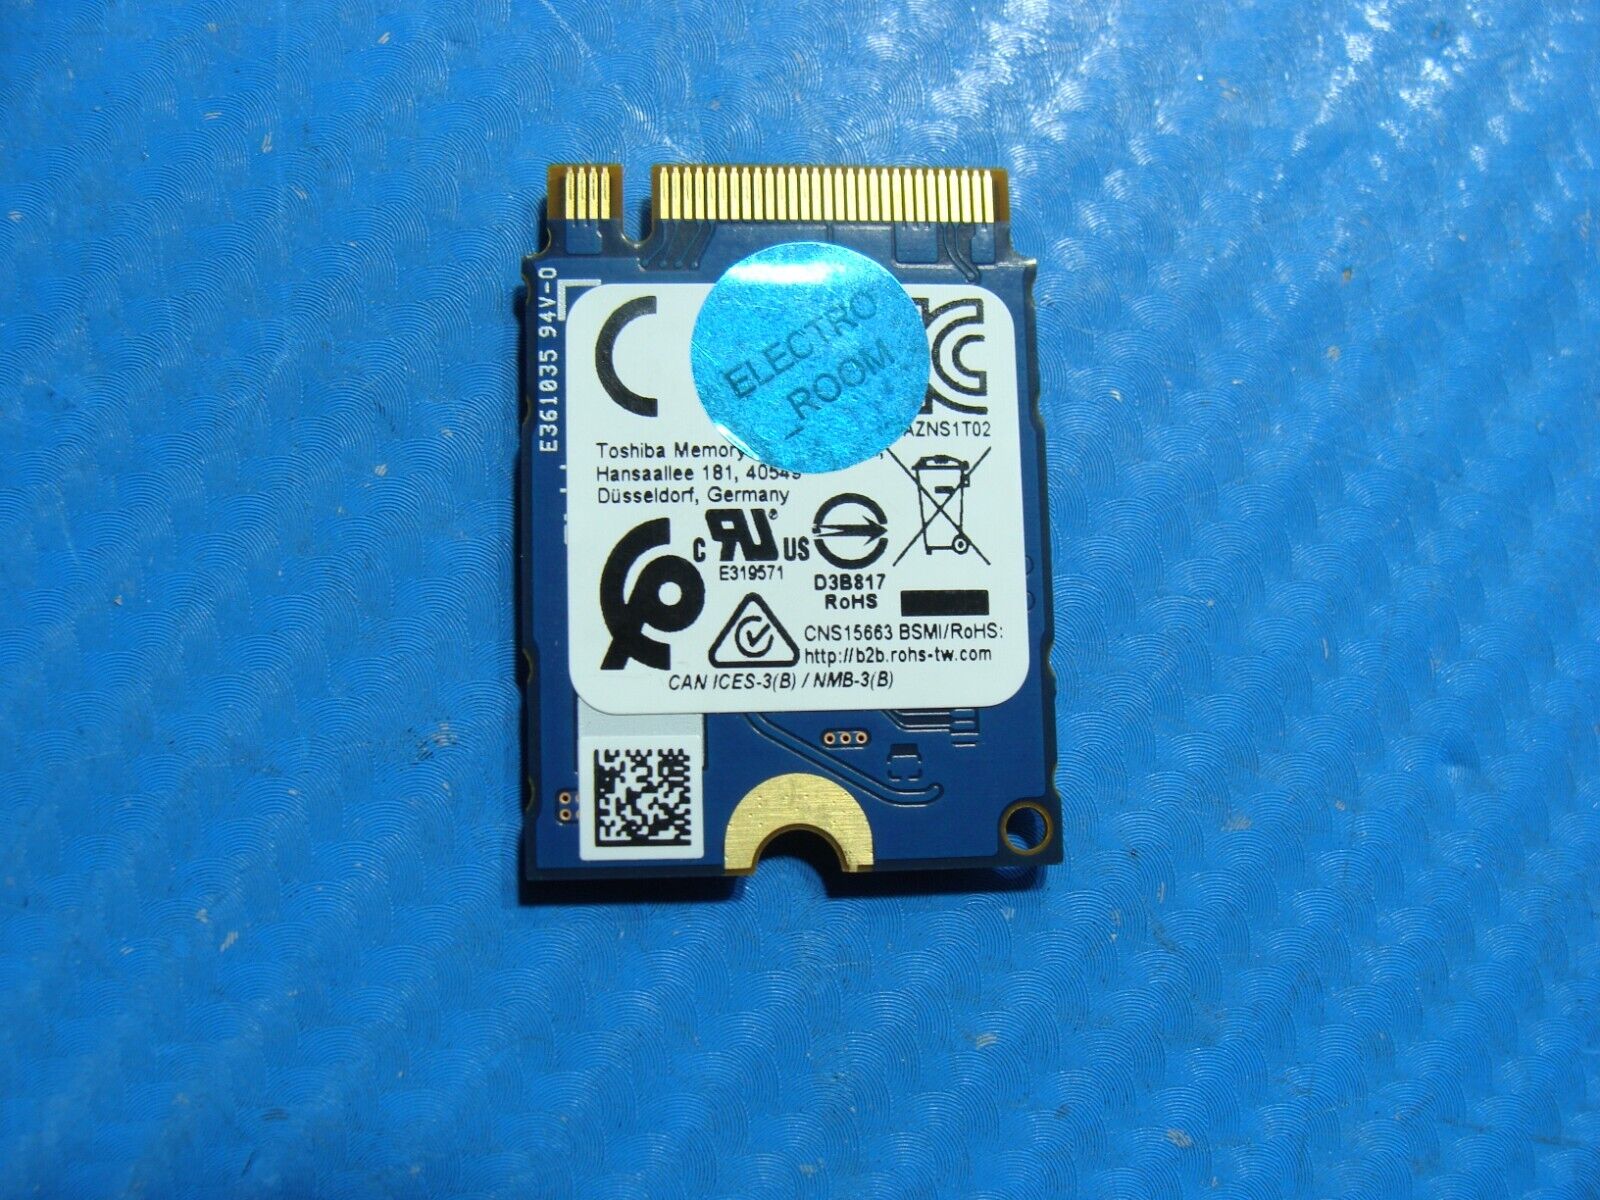 Dell 3583 Toshiba 256GB M.2 NVMe SSD Solid State Drive KBG40ZNS256G FWJTG